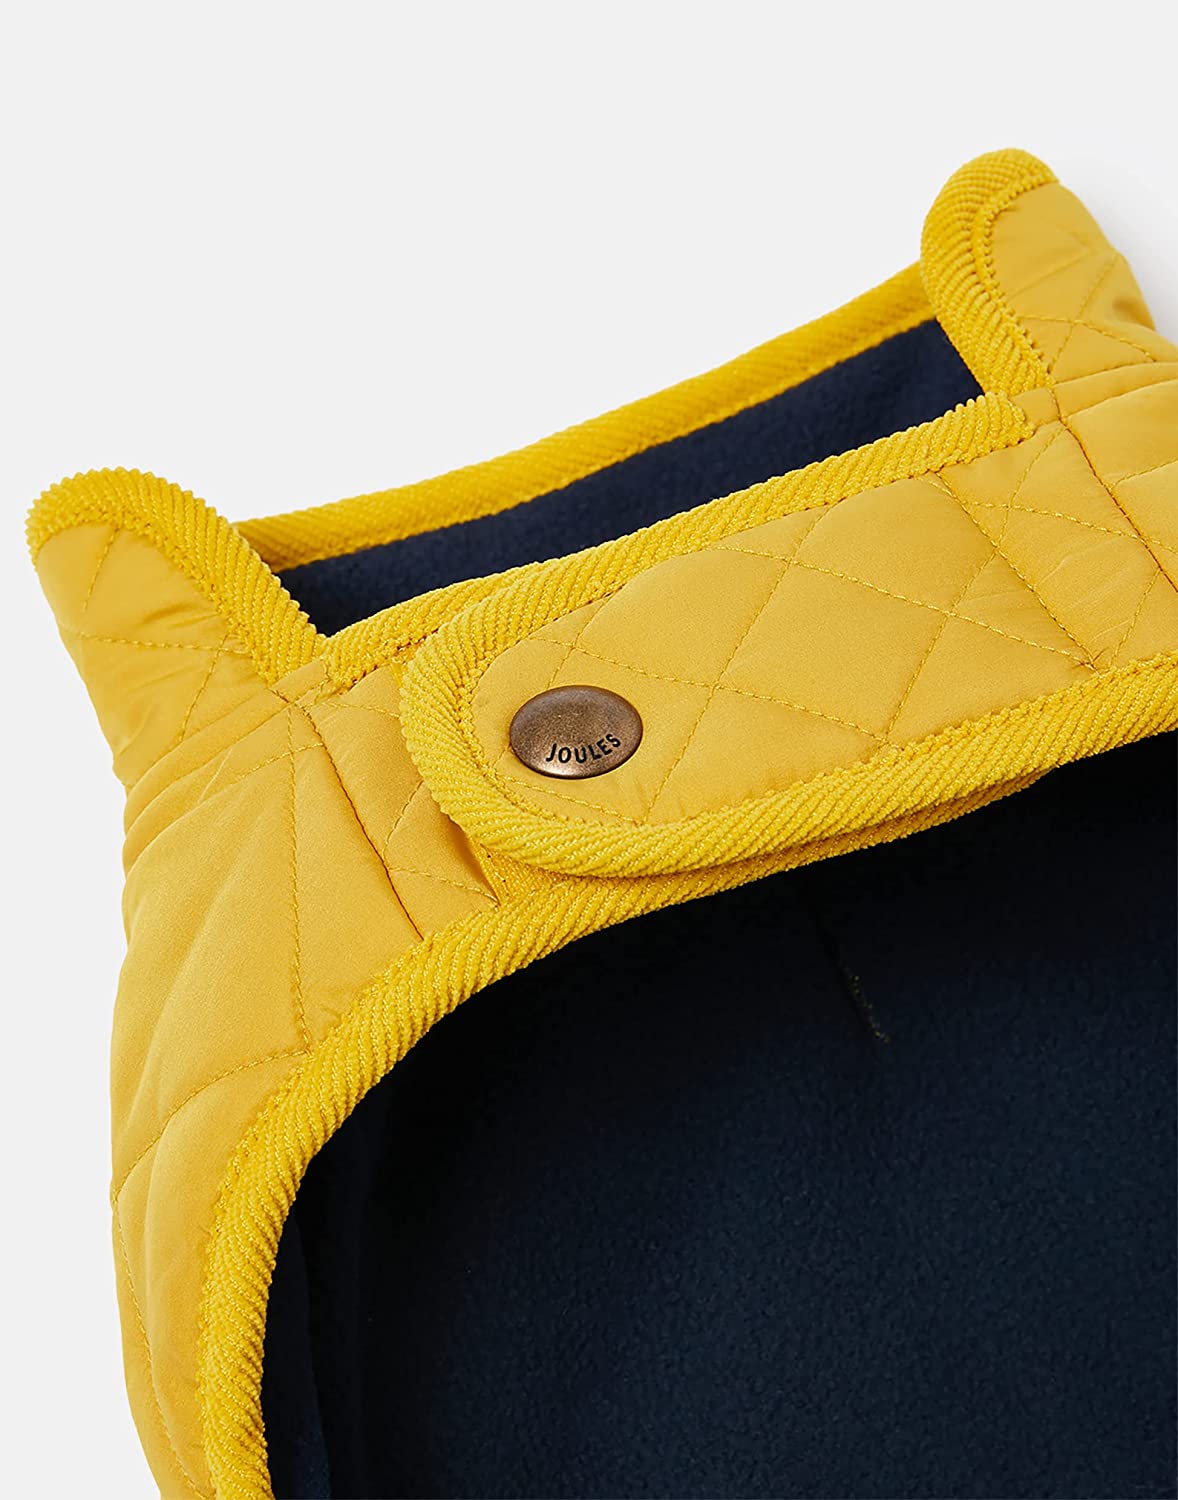 Quilted Dog Coat in antique gold